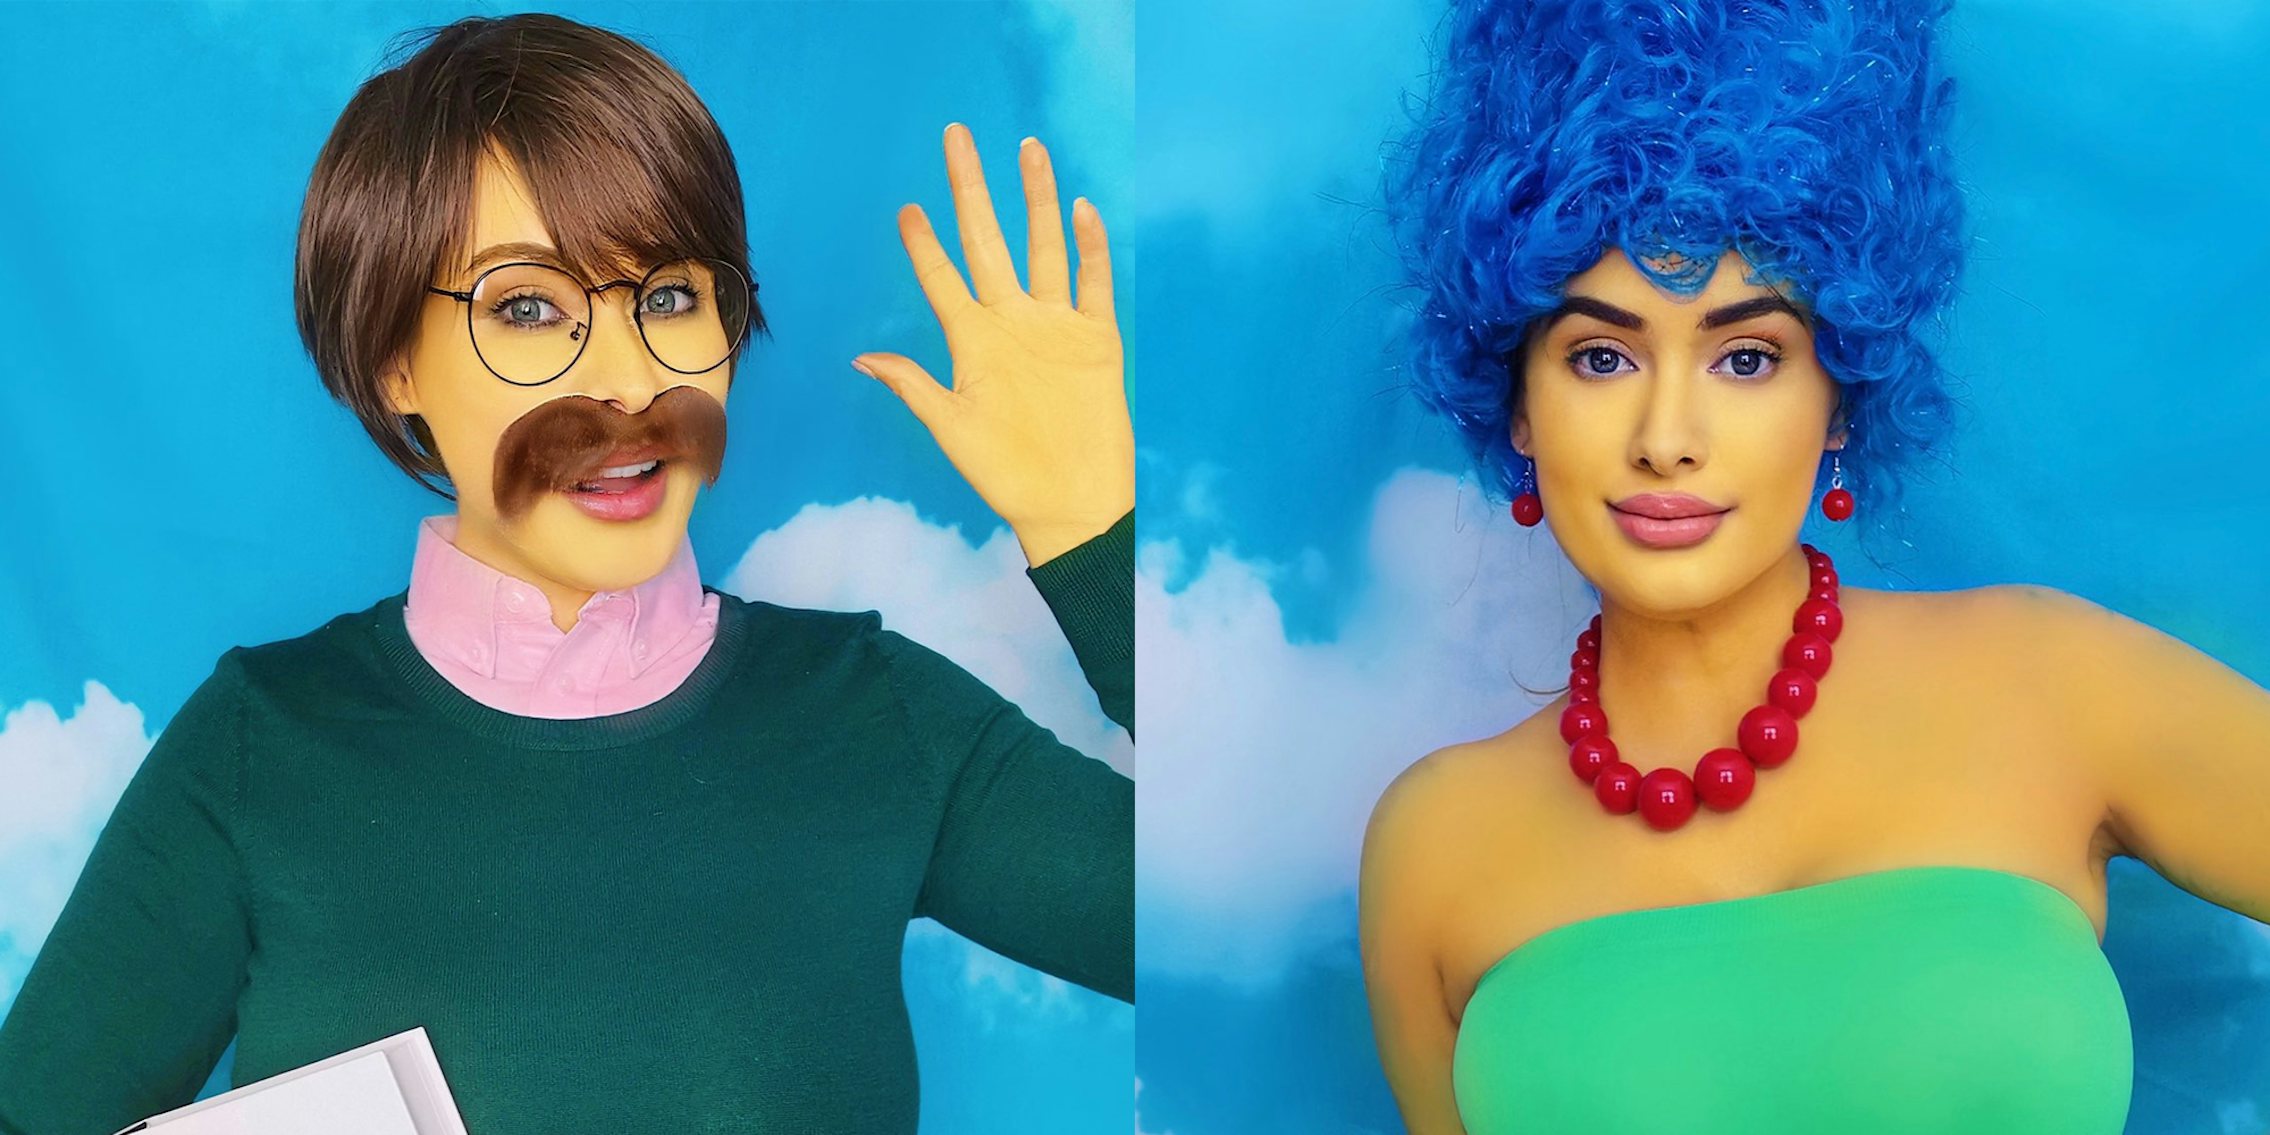 Laura Lux as Ned Flanders and Marge Simpson